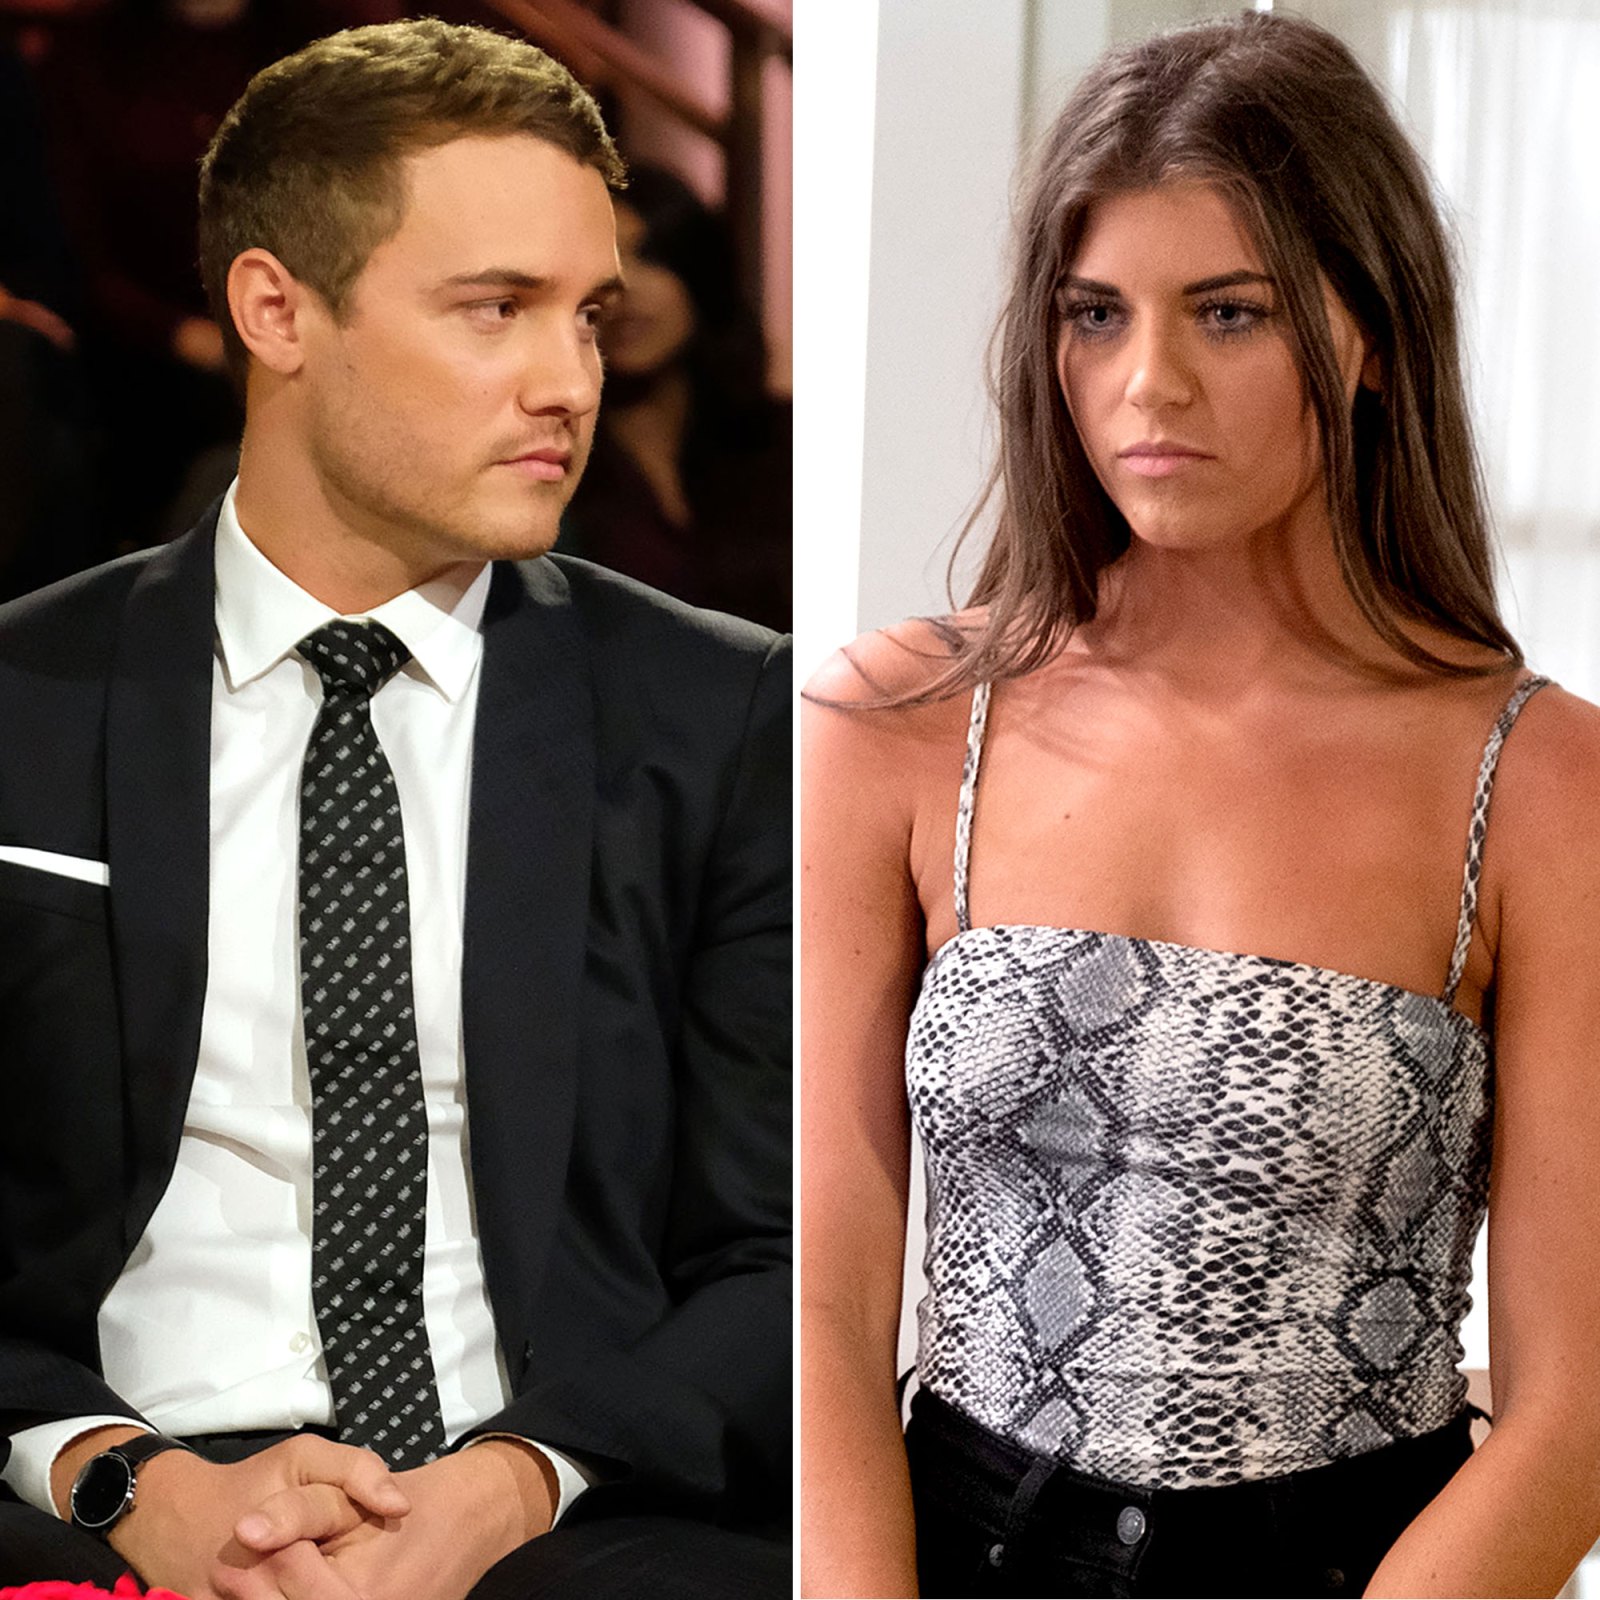 Peter Weber and Madison Prewett All the Drama Between Peter Weber and His Bachelor Cast Since the Finale